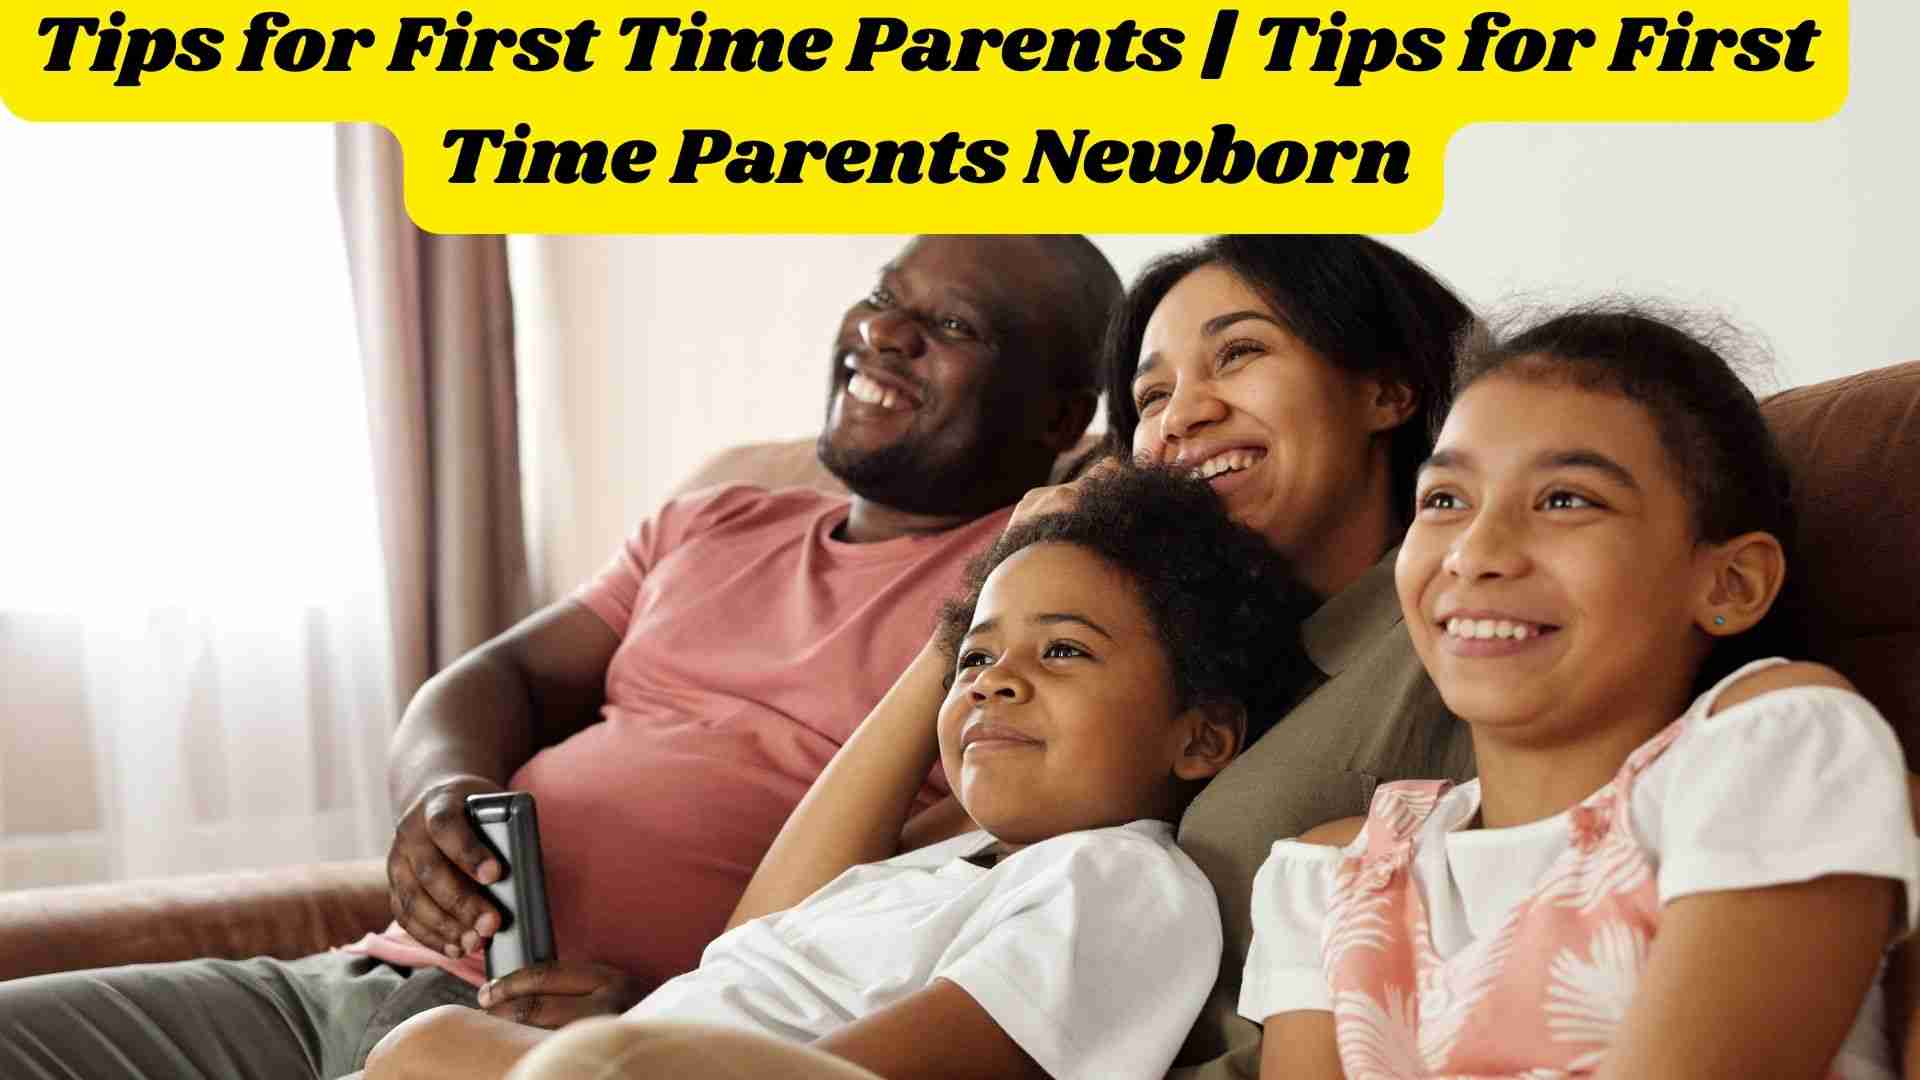 Tips for First Time Parents | Tips for First Time Parents Newborn wallpaper and images